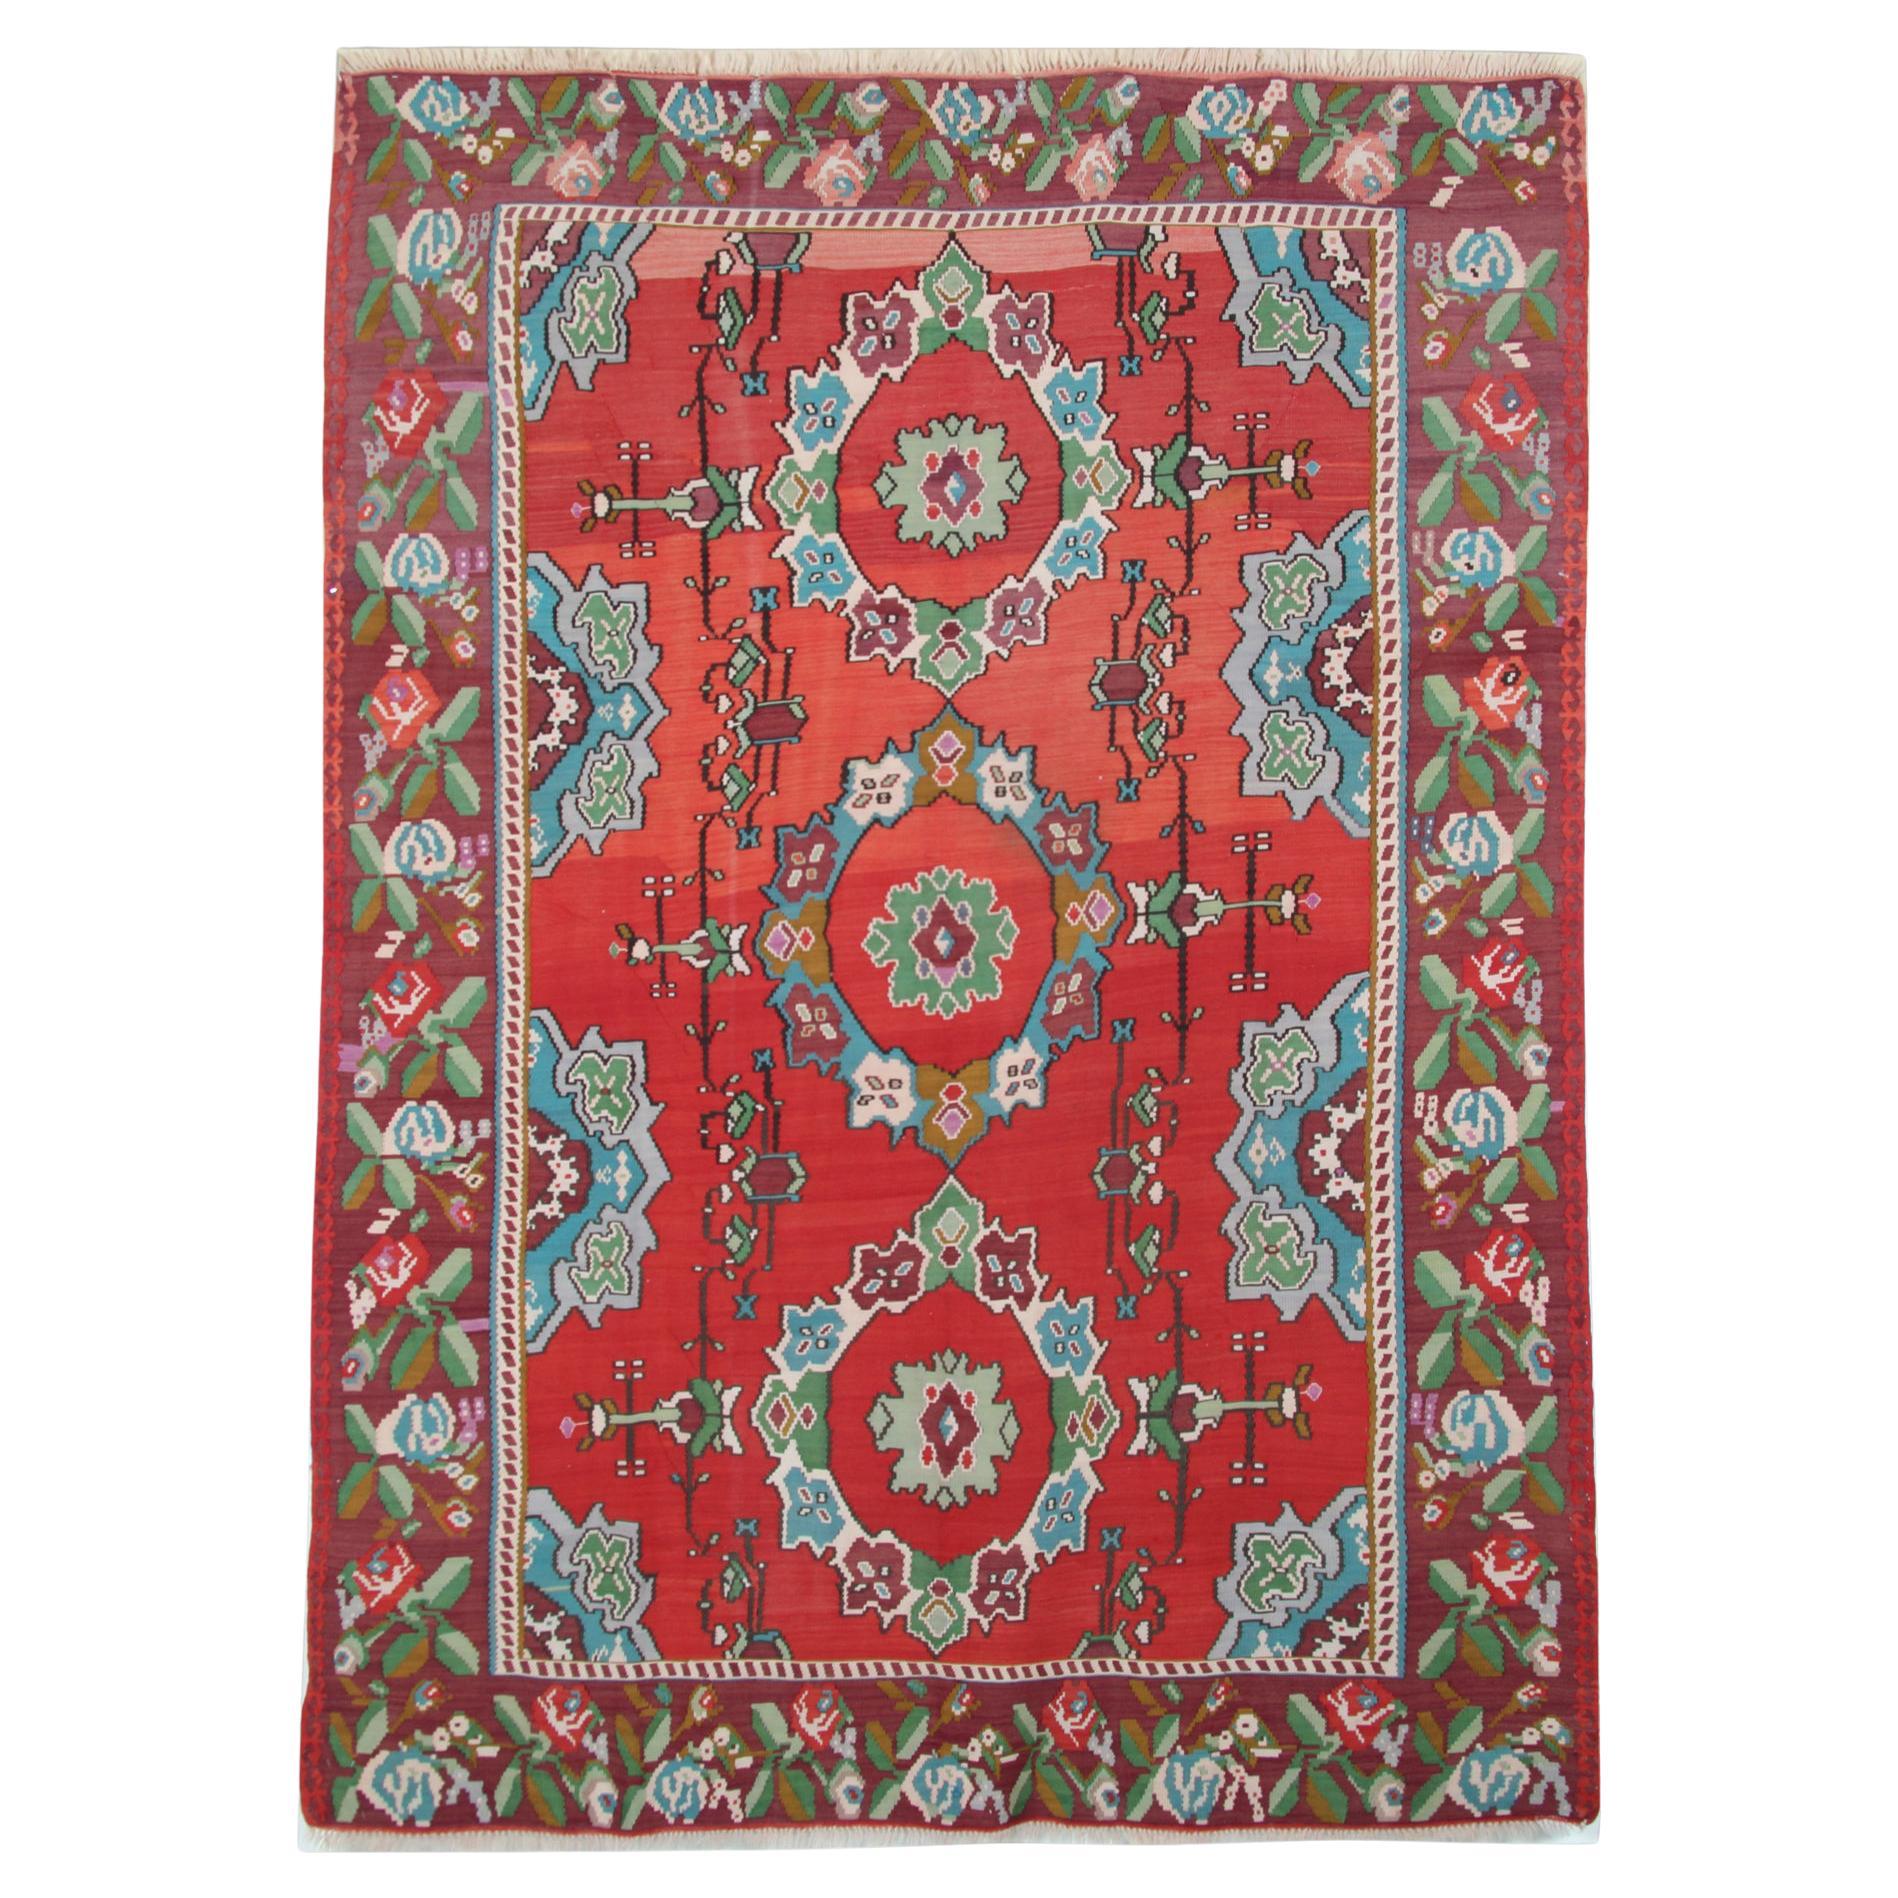 Handmade Oriental Red Kilim Carpet Traditional Area Rugs for Sale